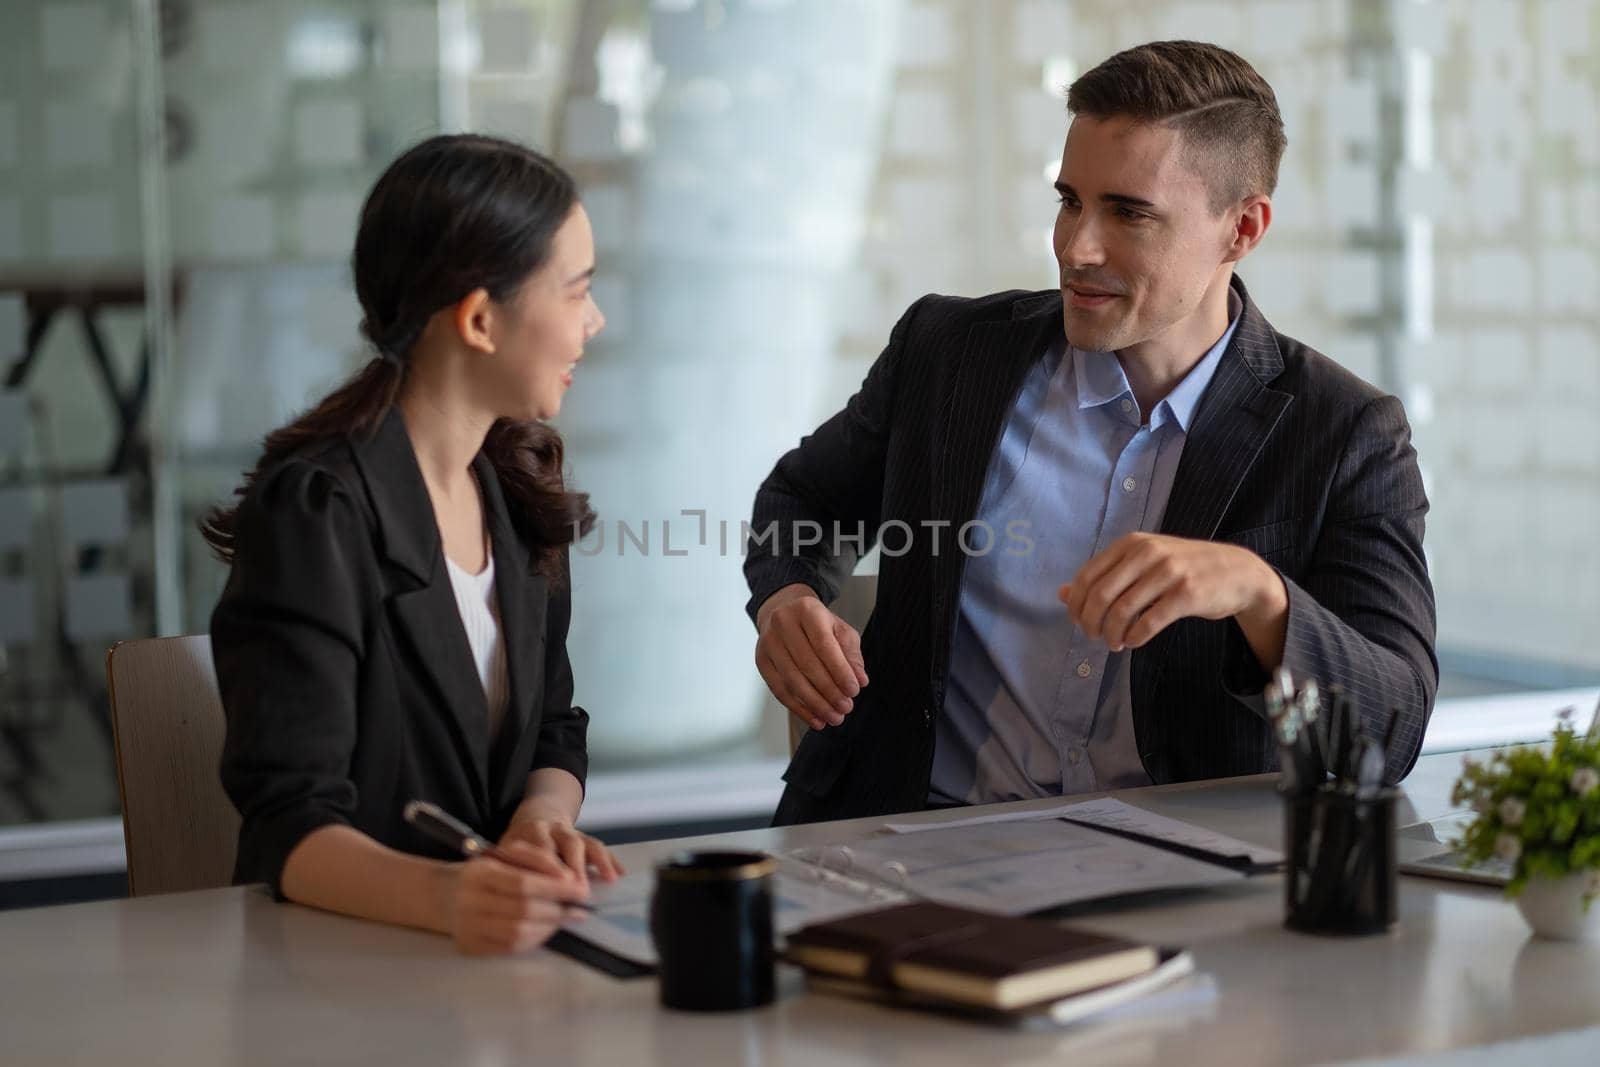 Multiethnic male caucasian mentor and female asian sitting at desk with laptop doing paperwork together discussing project financial report. Corporate business collaboration concept by nateemee